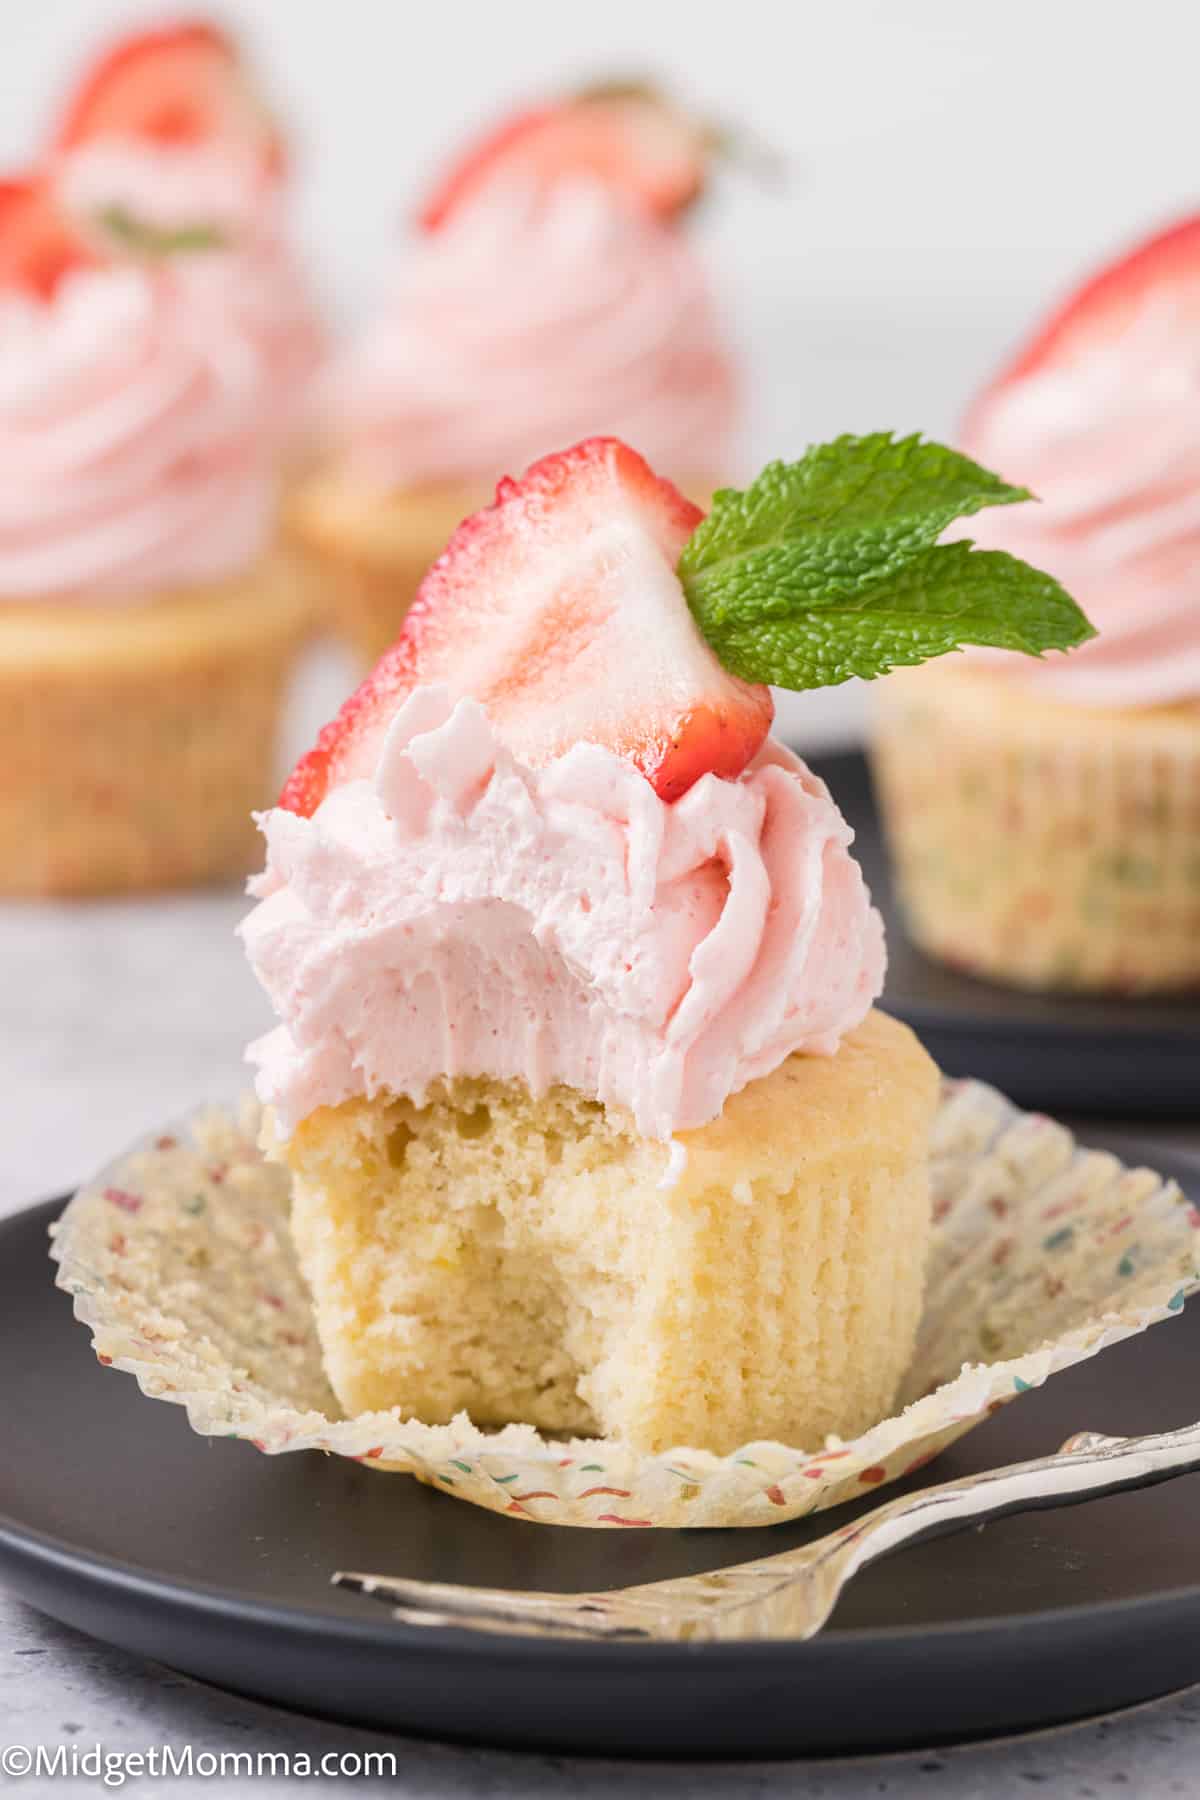 Strawberry cupcake with a bite out of it